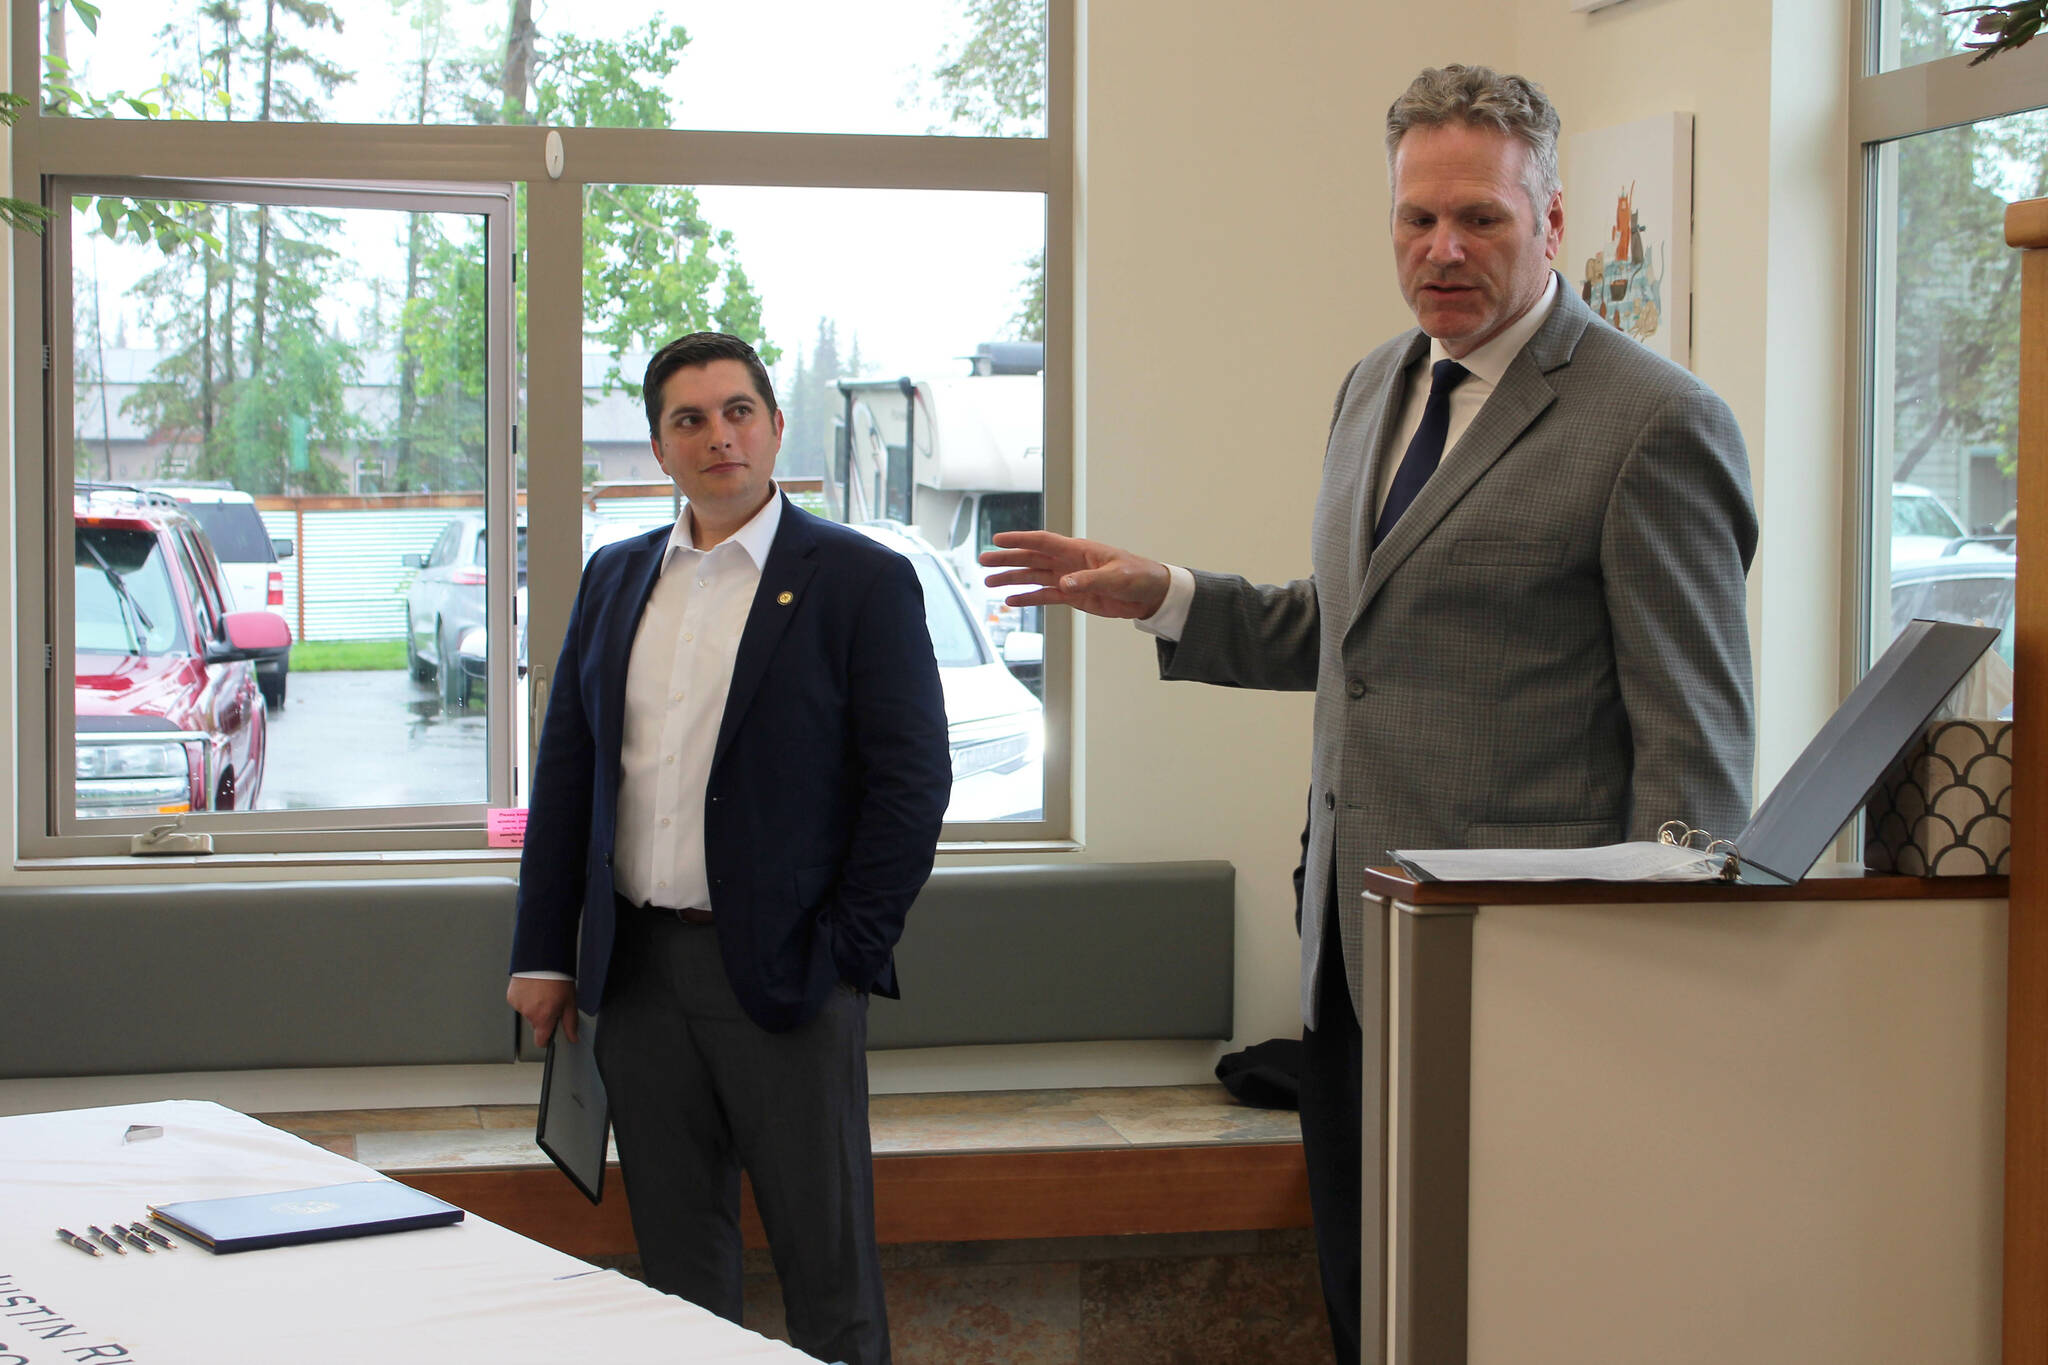 Gov. Mike Dunleavy (right) delivers opening remarks at a bill signing event at Twin Cities Veterinary Clinic on Thursday, July 6, 2023 in Soldotna, Alaska. (Ashlyn O’Hara/Peninsula Clarion)